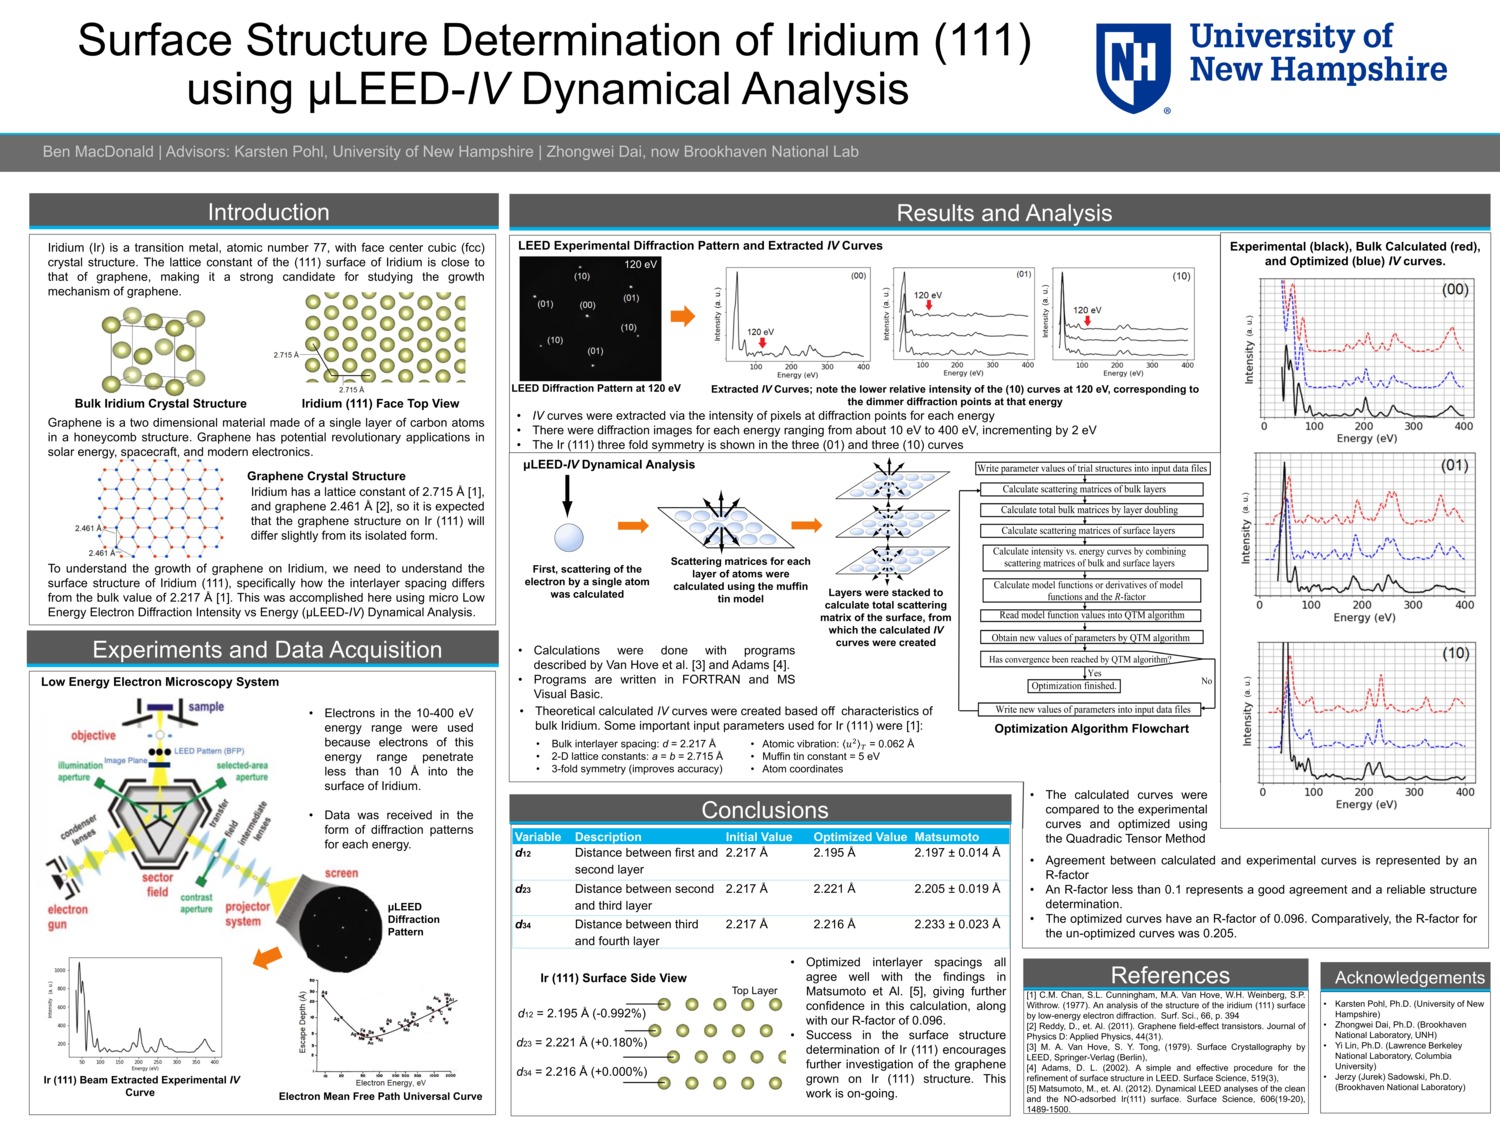 Surface Structure Determination Of Iridium (111) Using Μleed-Iv Dynamical Analysis by bpm2000